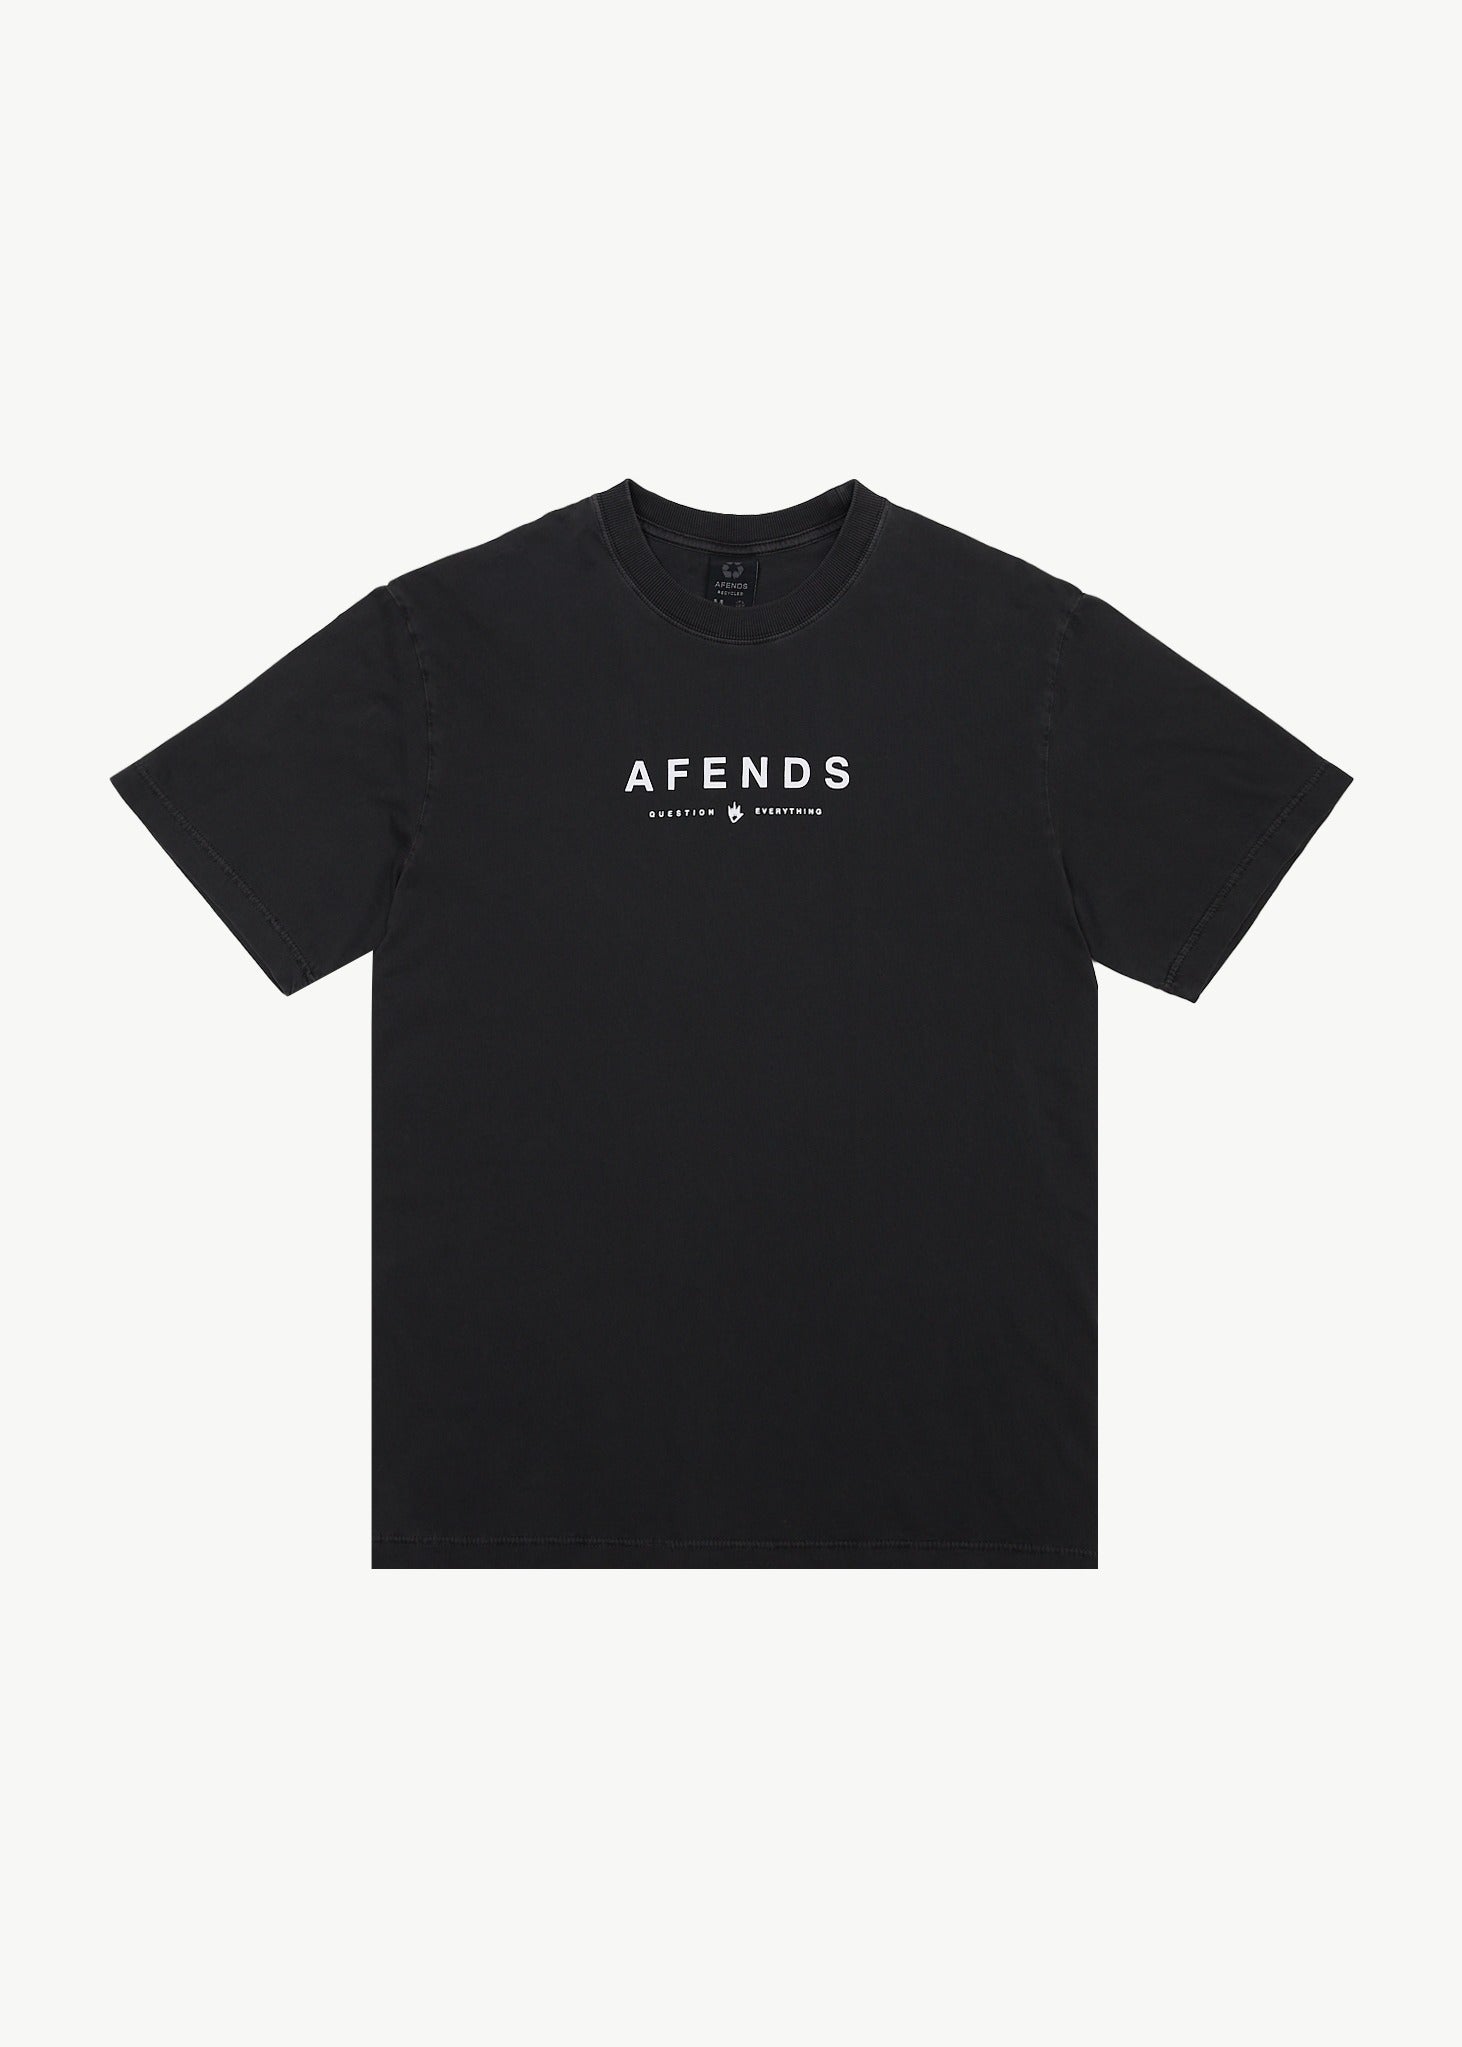 Afends Retro Fit Tee White Black